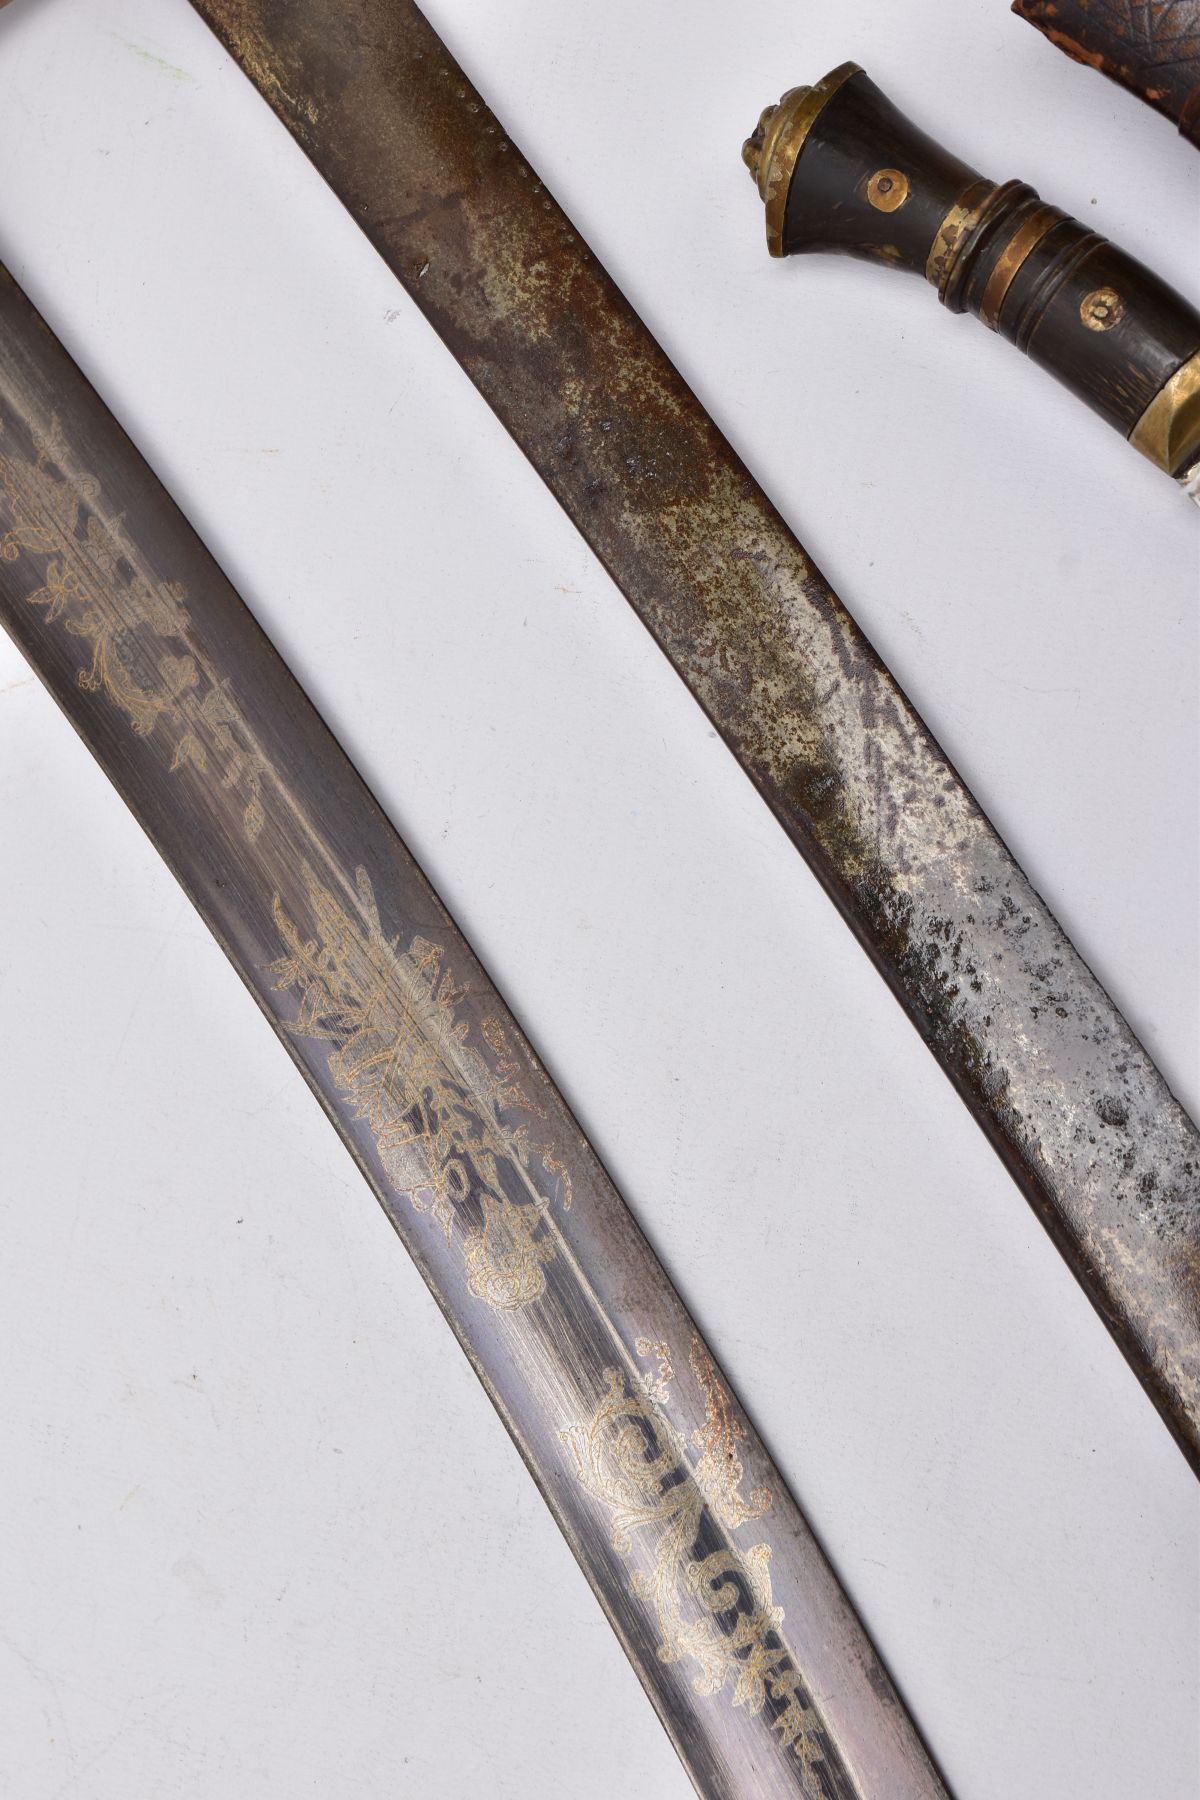 TWO LONG CURVED BLADE SWORDS, Eastern in design and looks, blade on one has been lacquered, etched - Image 4 of 10